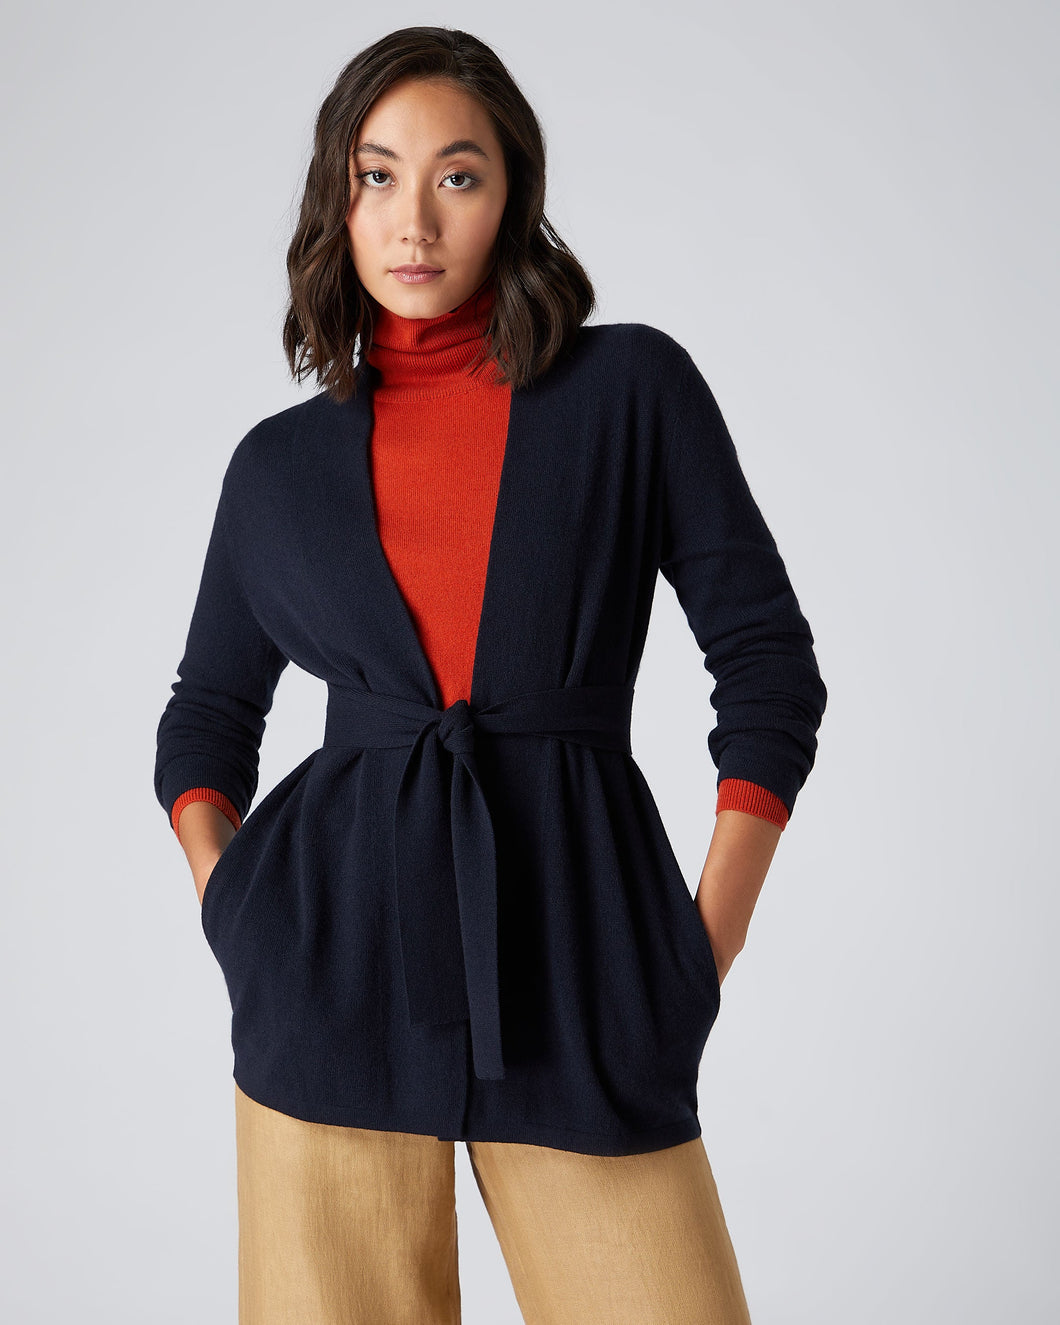 N.Peal Women's Relaxed Belted Cashmere Cardigan Navy Blue